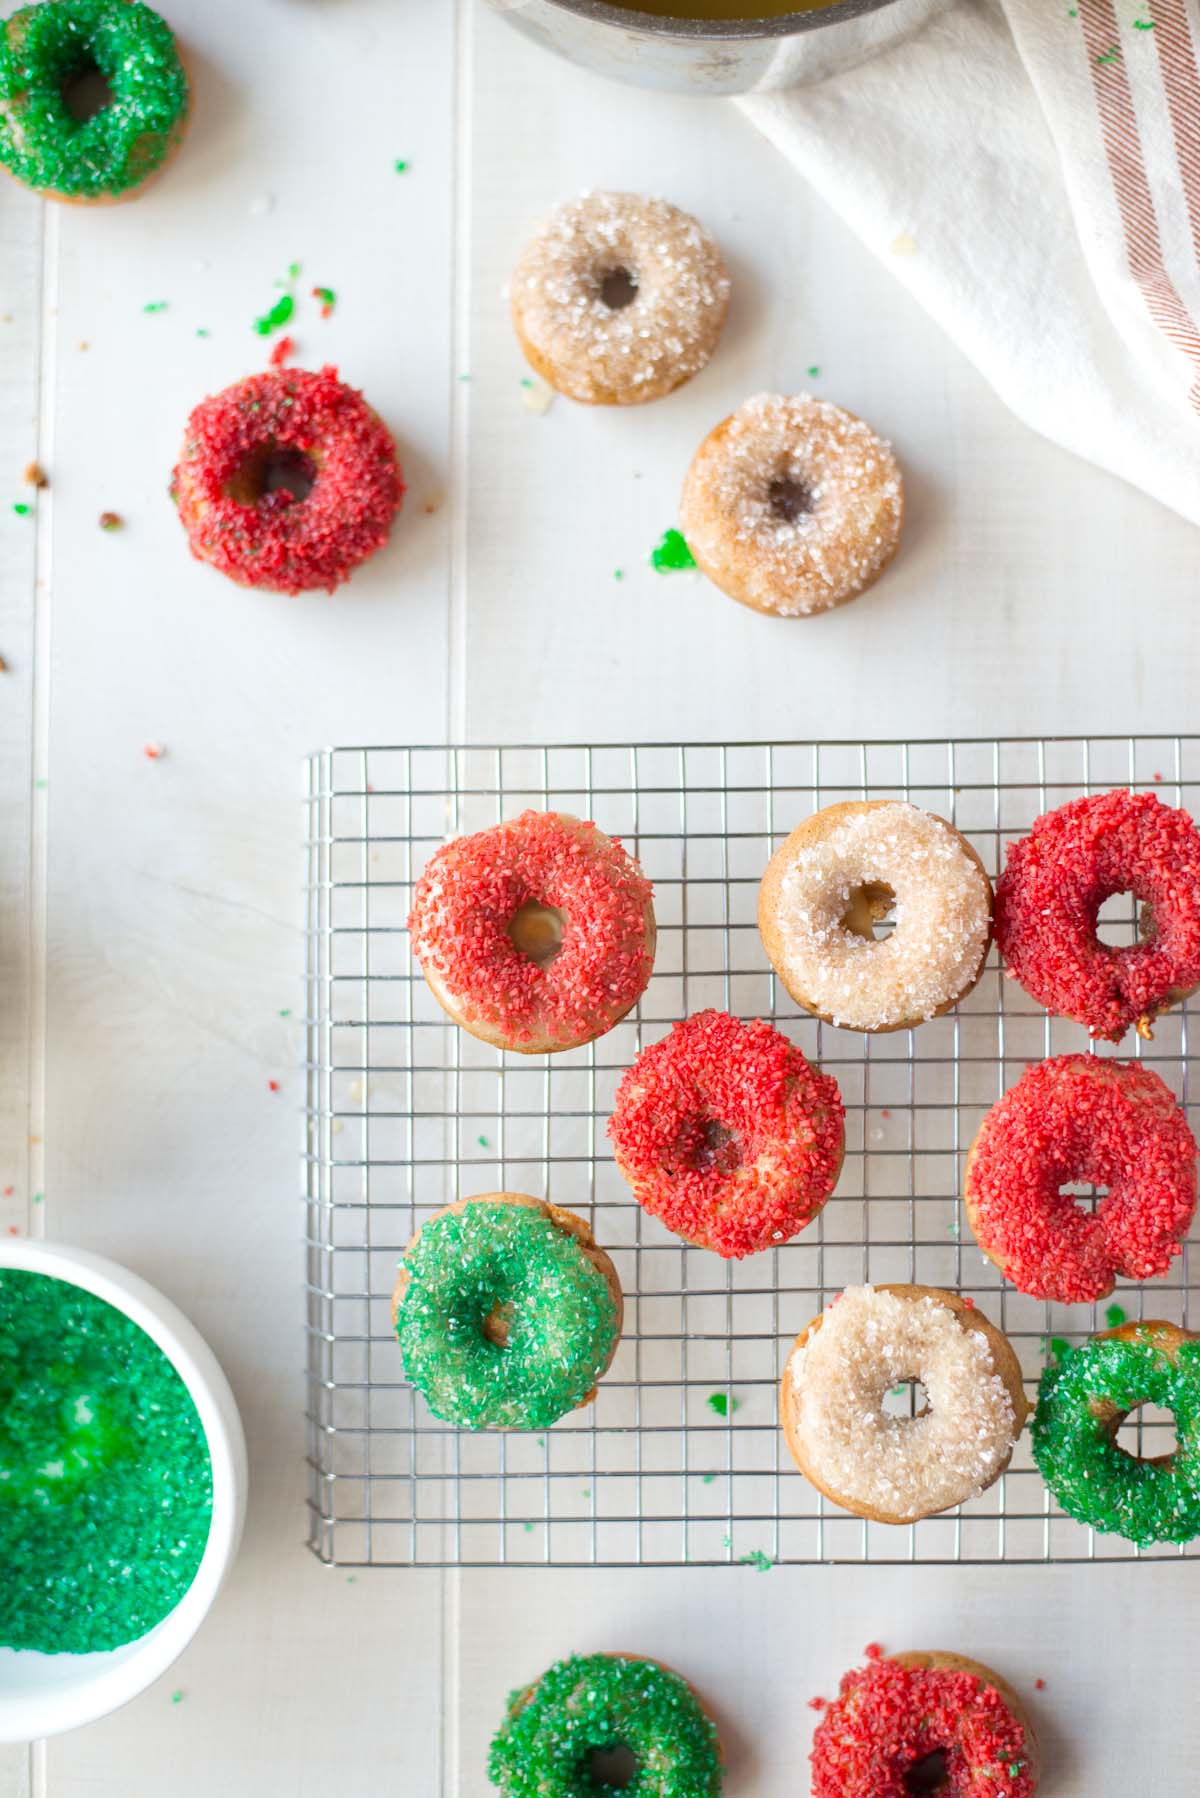 Quick, easy and delicious chai spiced paleo donuts made in less than 20 minutes. 